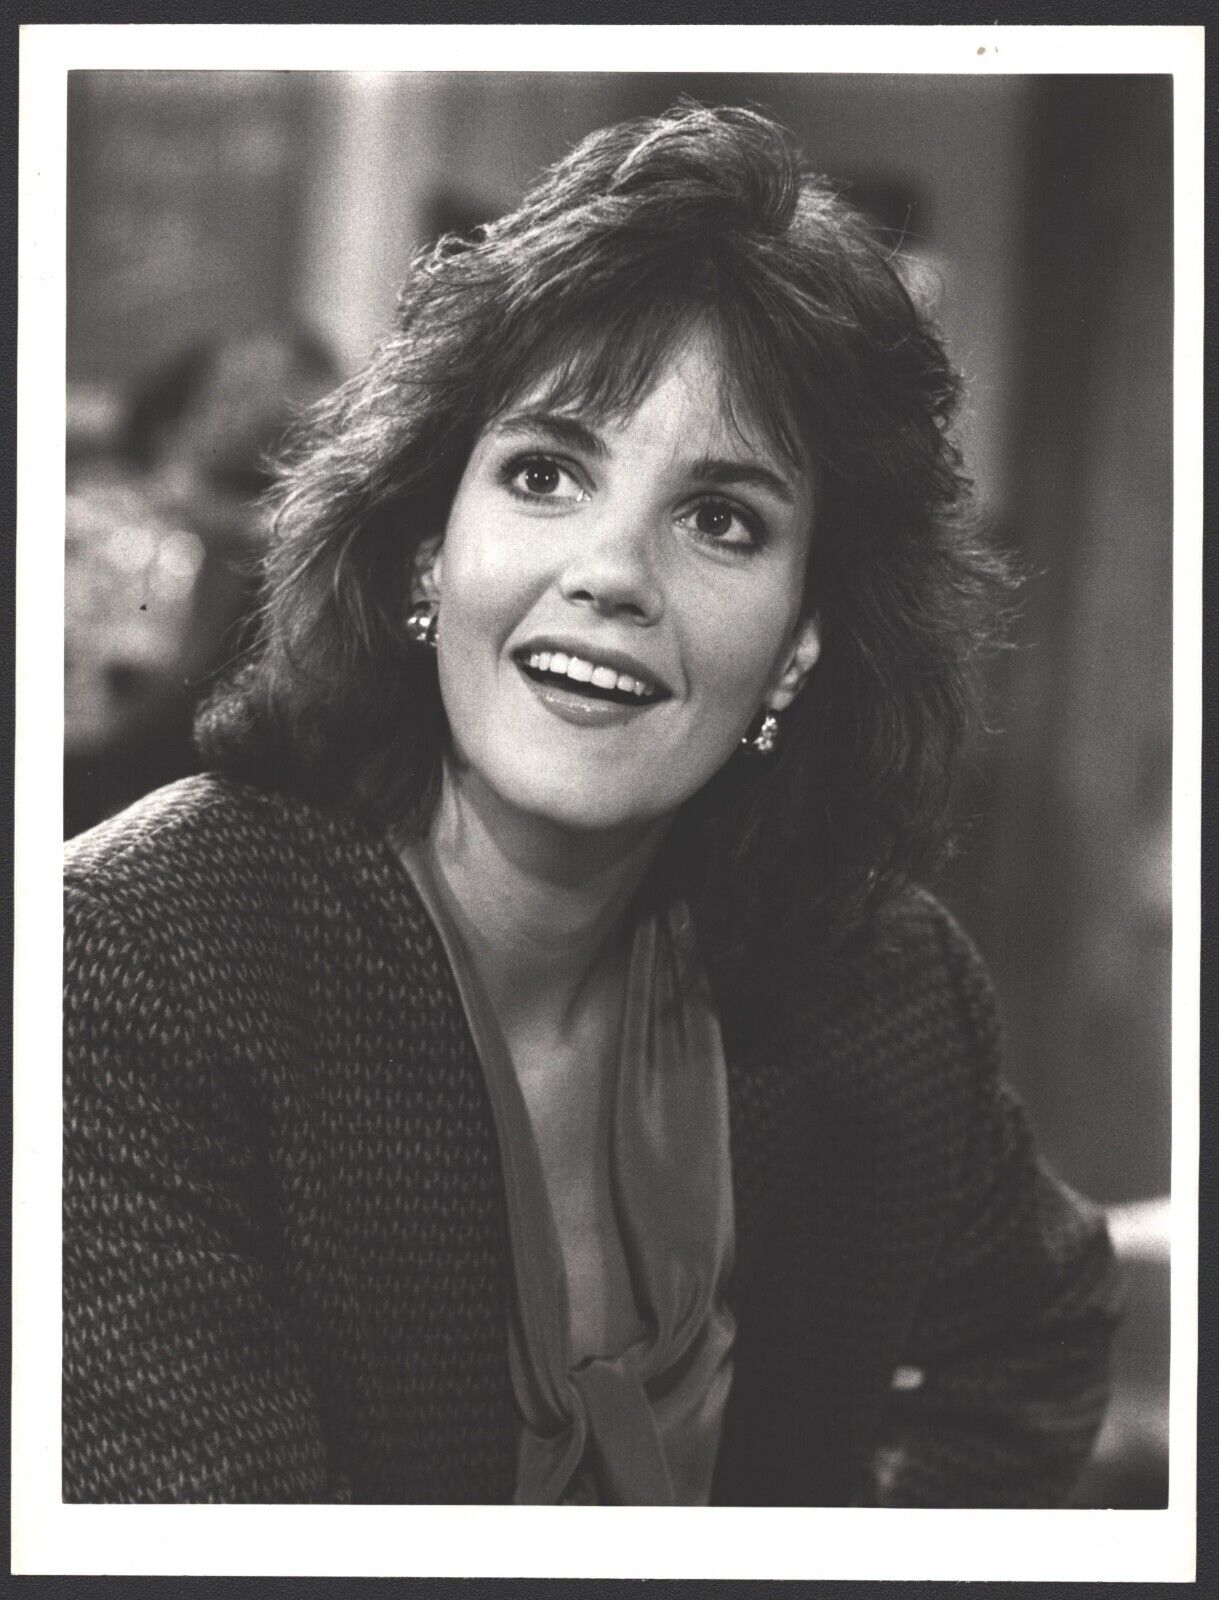 1985 CBS Press Photo of Margaret Colin for the TV Show Foley Square